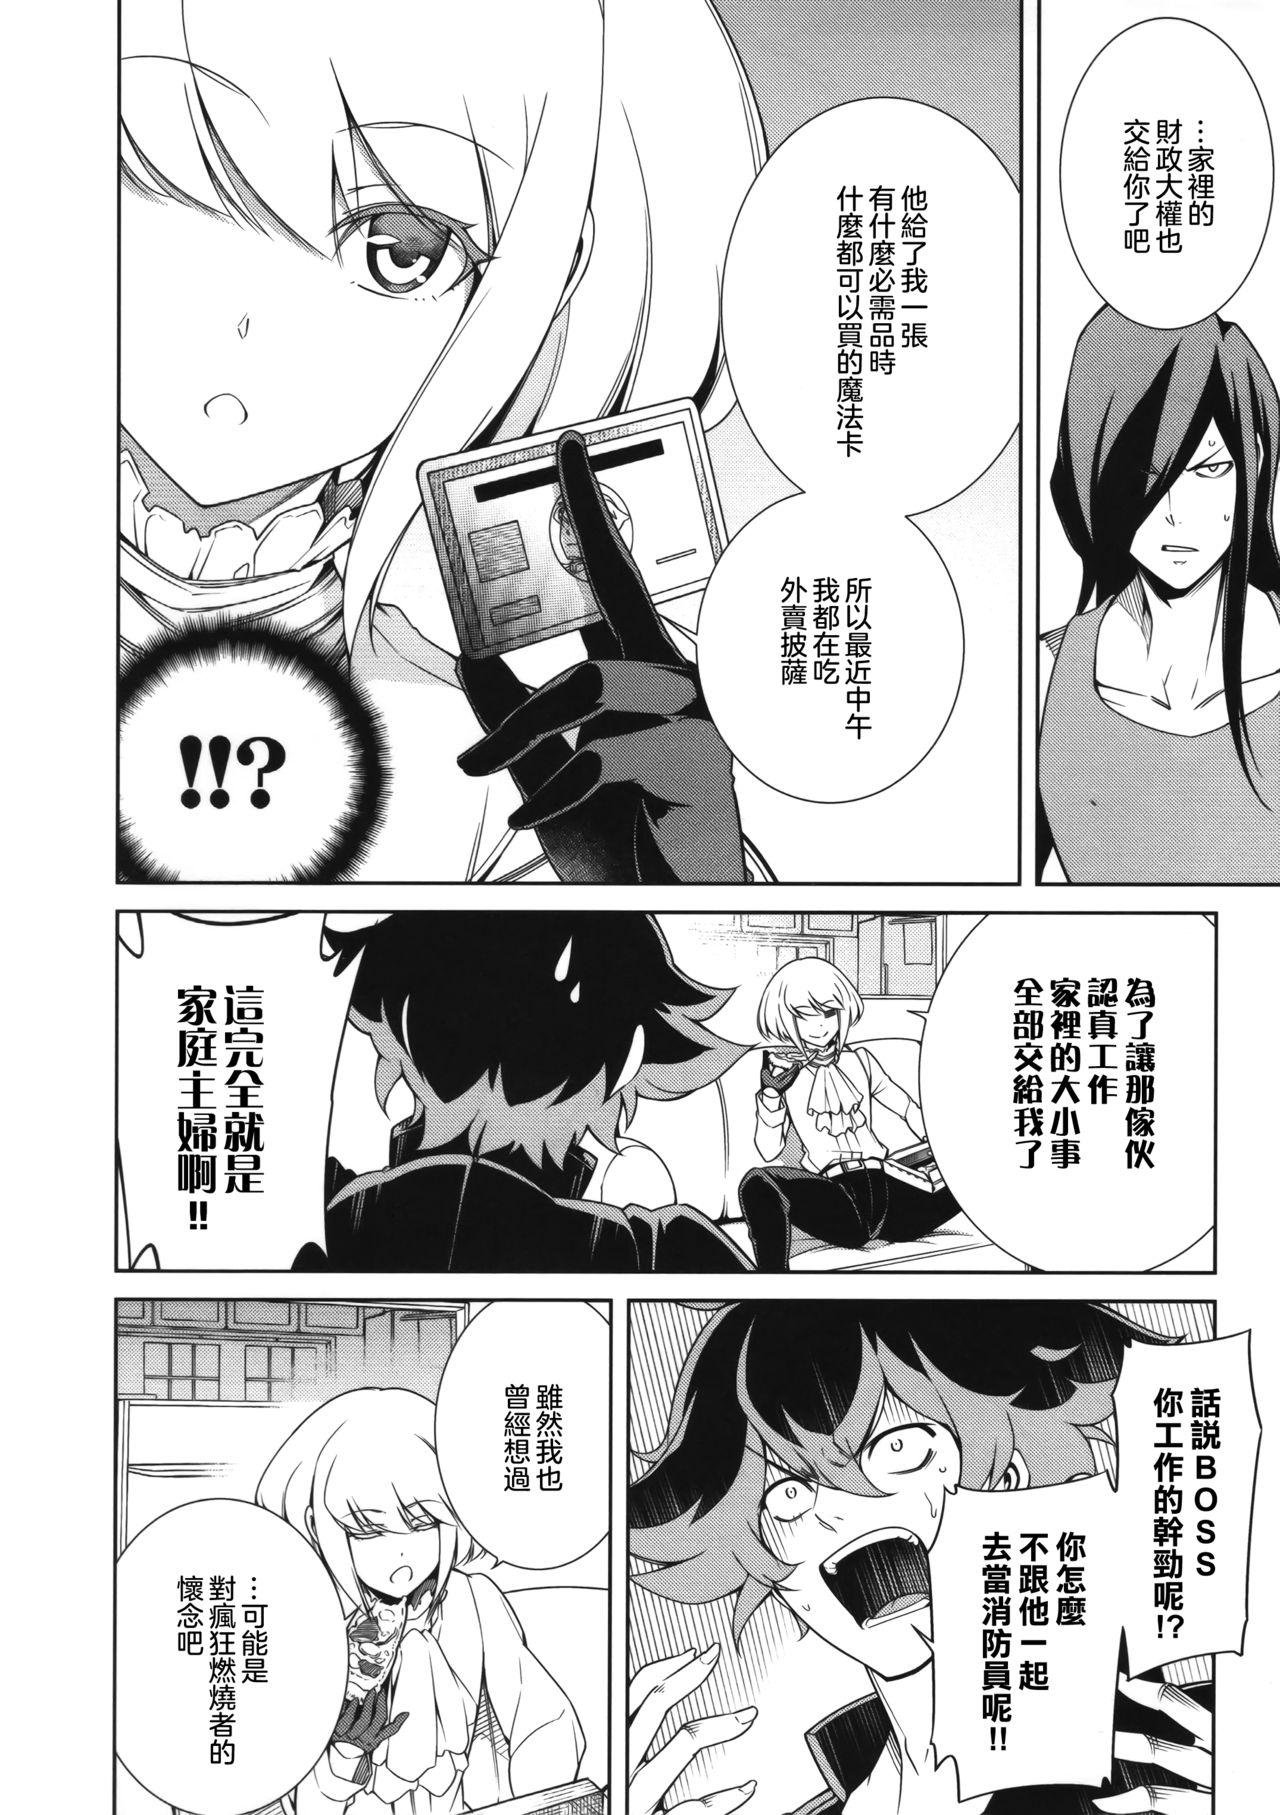 Mama PROMISED PROPOSE - Promare Free Blow Job - Page 10